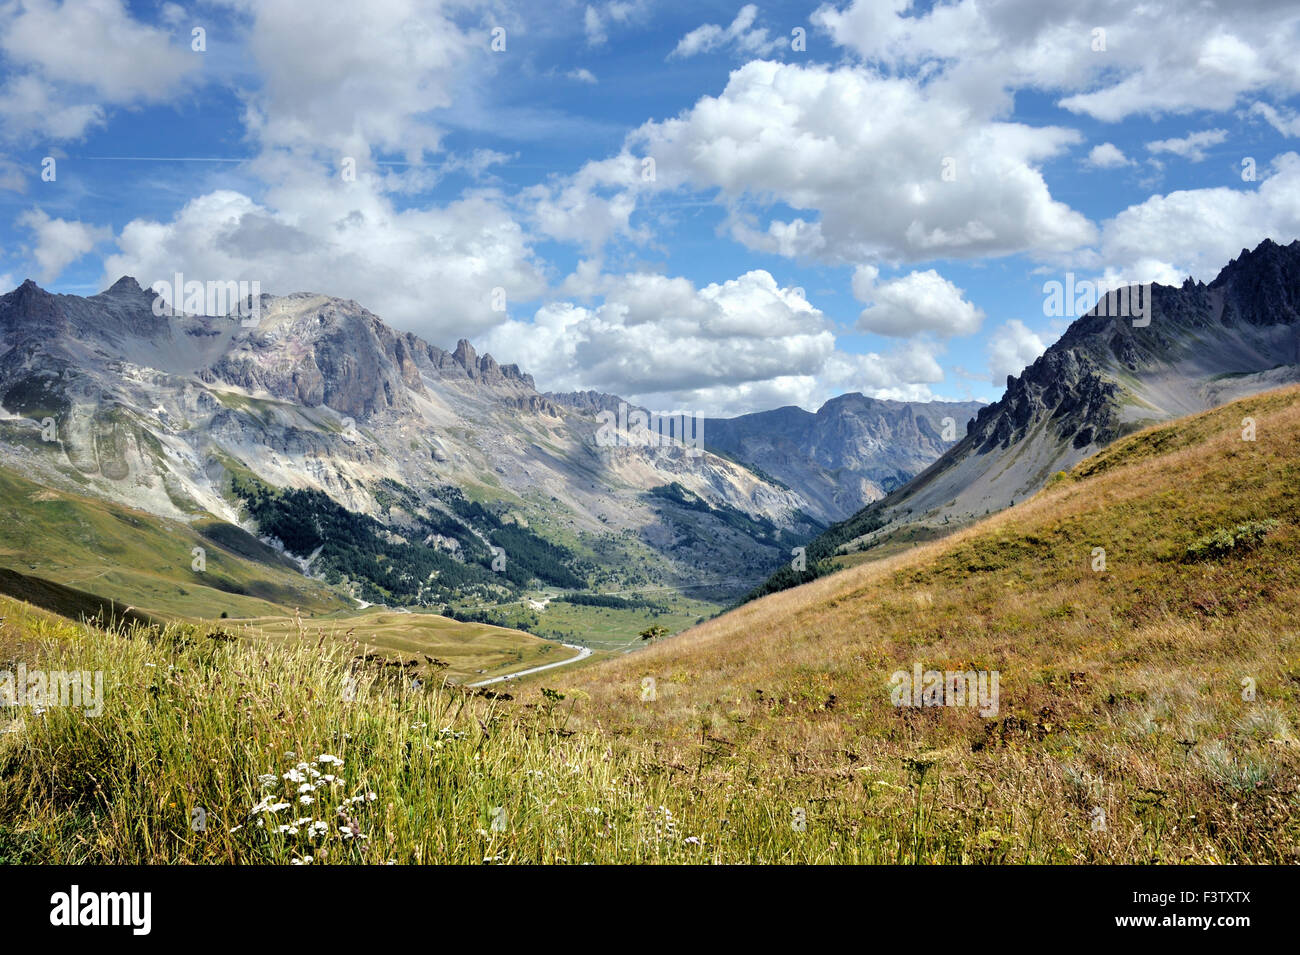 Landscape between pass Galibier and pass Lautaret, French Alps, France Stock Photo